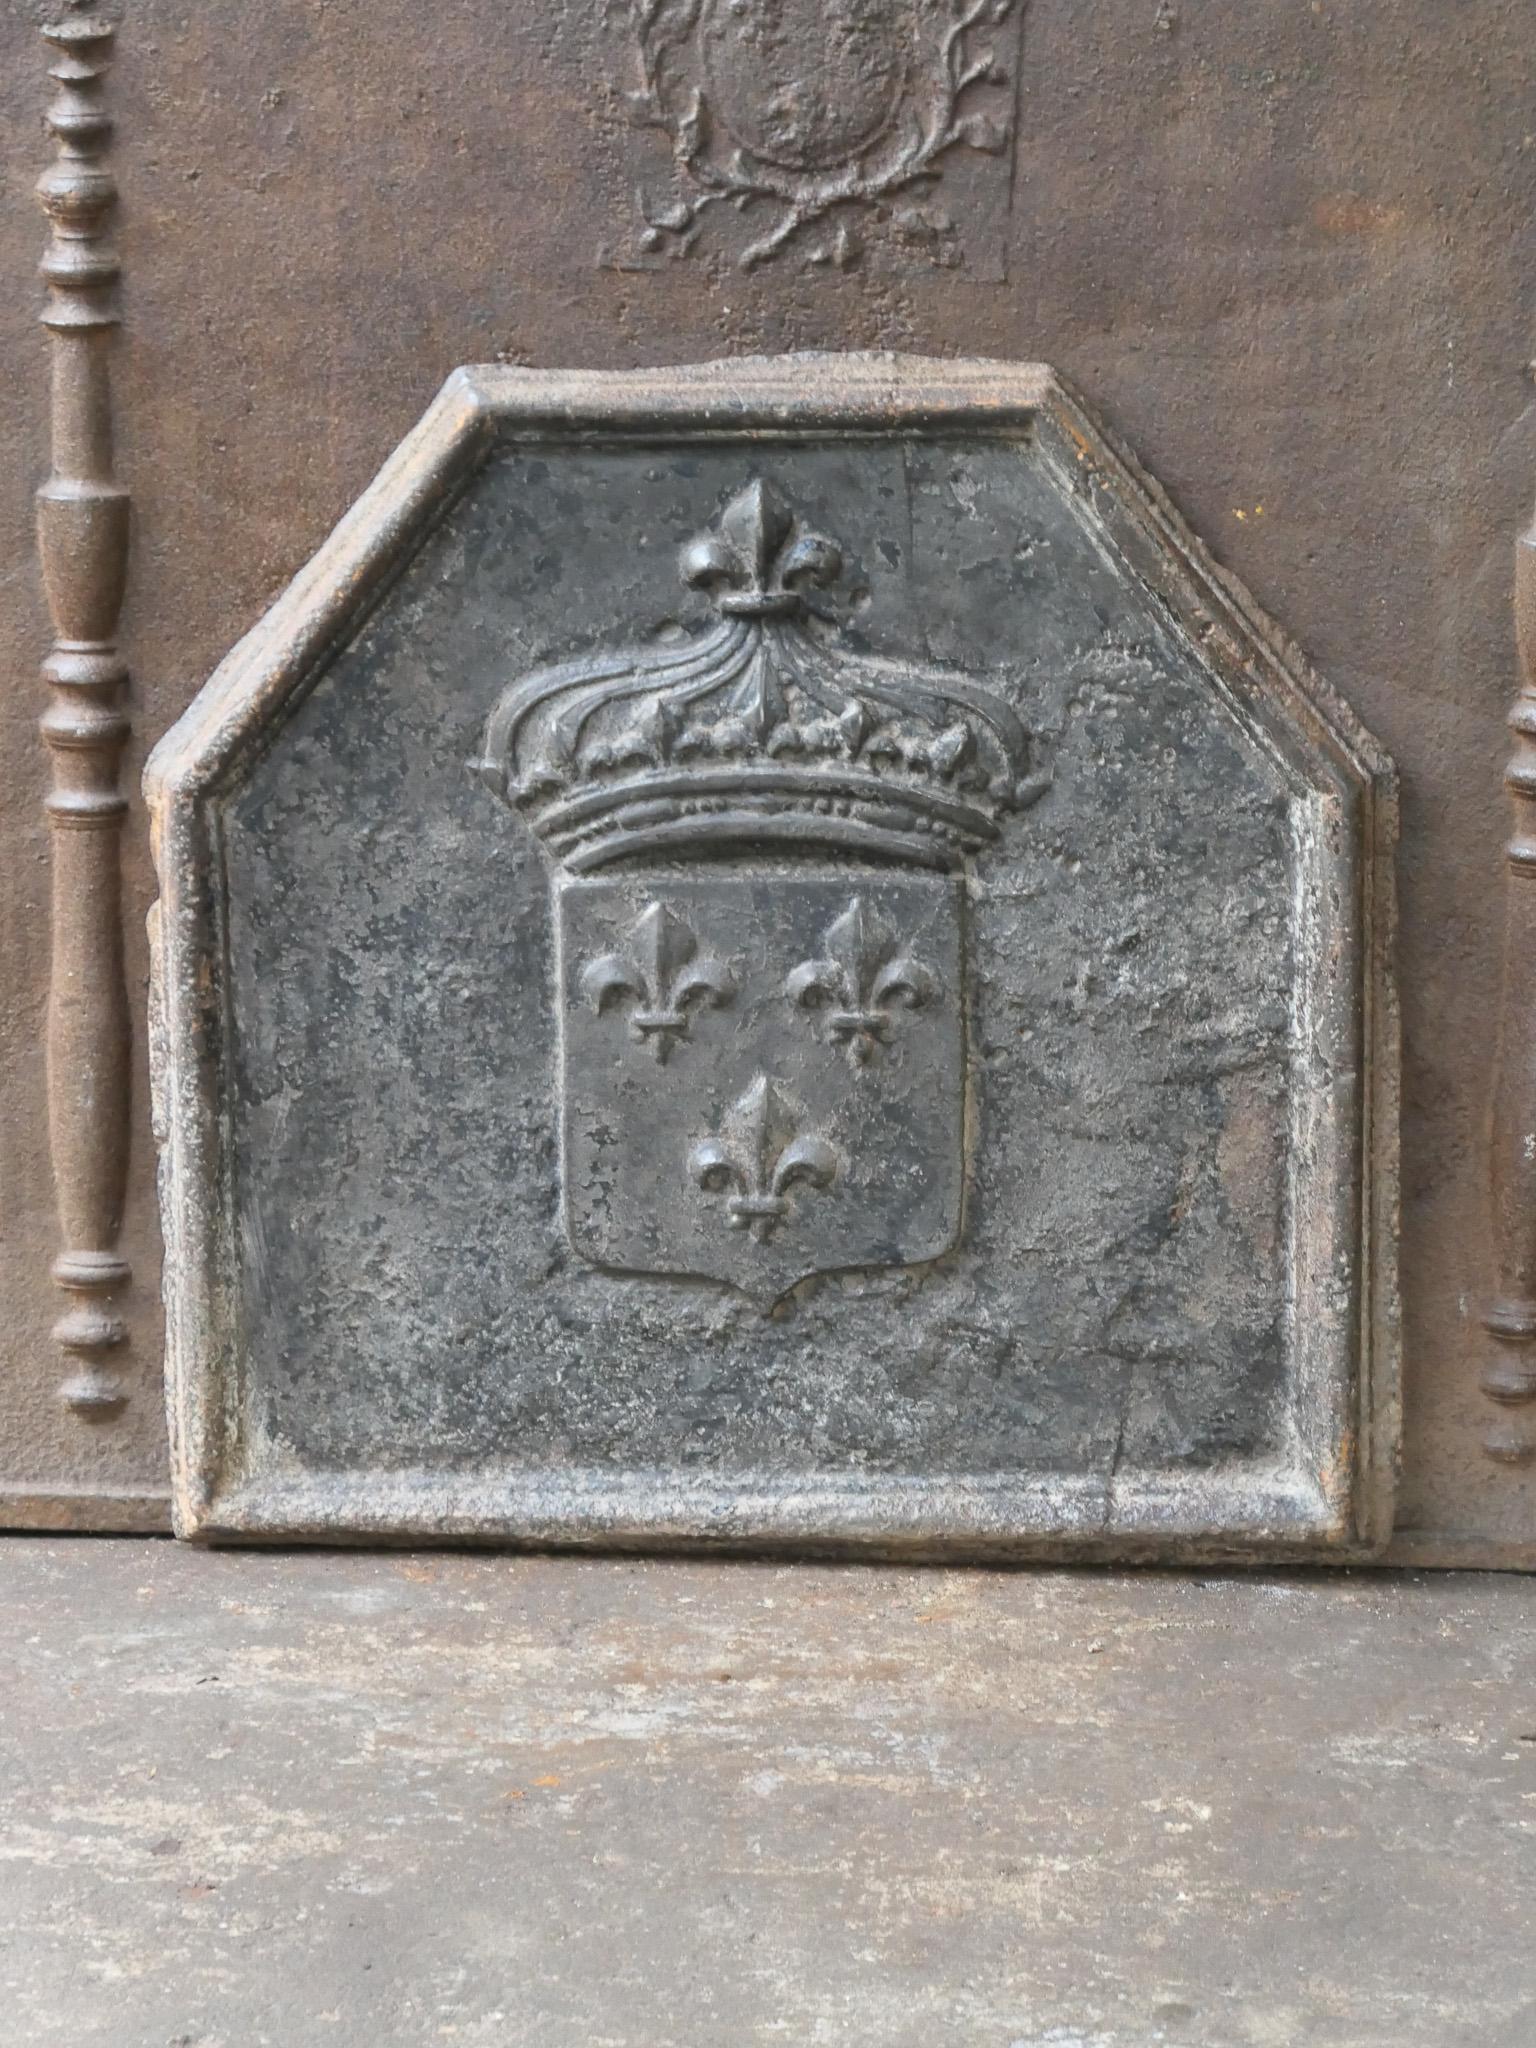 17th century French Louis XIV period fireback with the Arms of France. A coat of arms of the House of Bourbon, an originally French royal house that became a major dynasty in Europe. The house delivered kings for Spain (Navarra), France, both